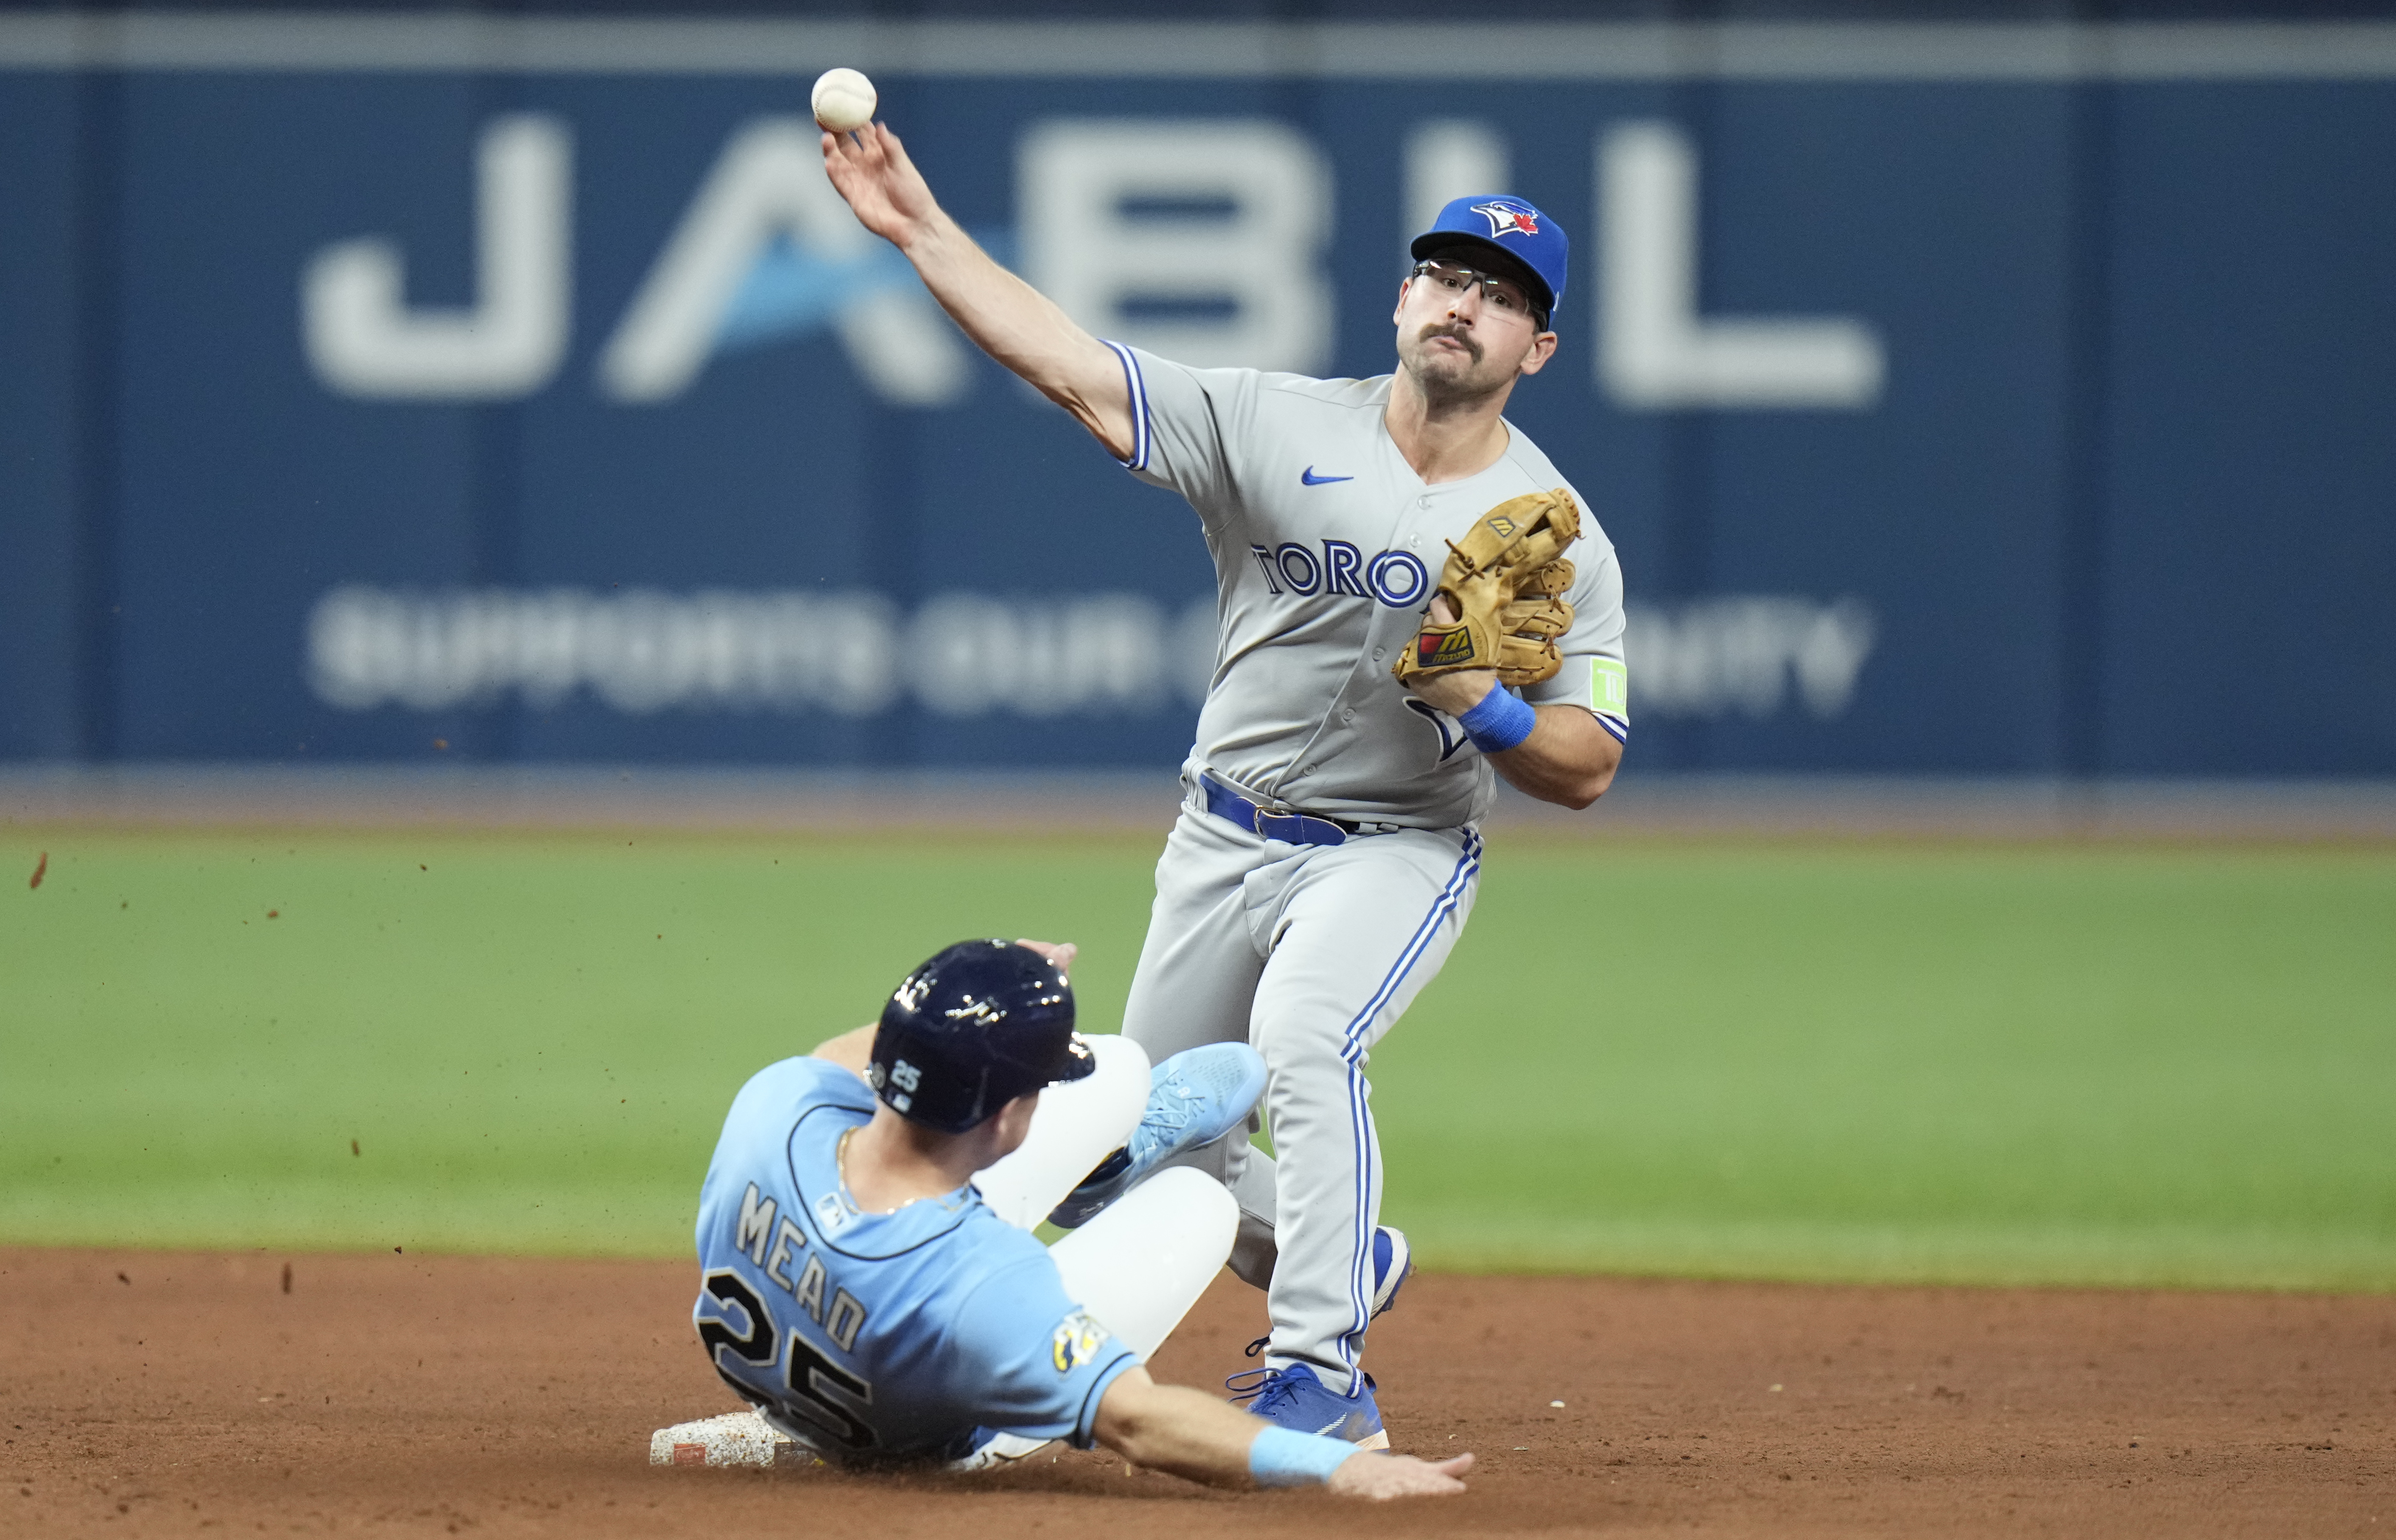 Blue Jays gear up for Wild Card series against Twins